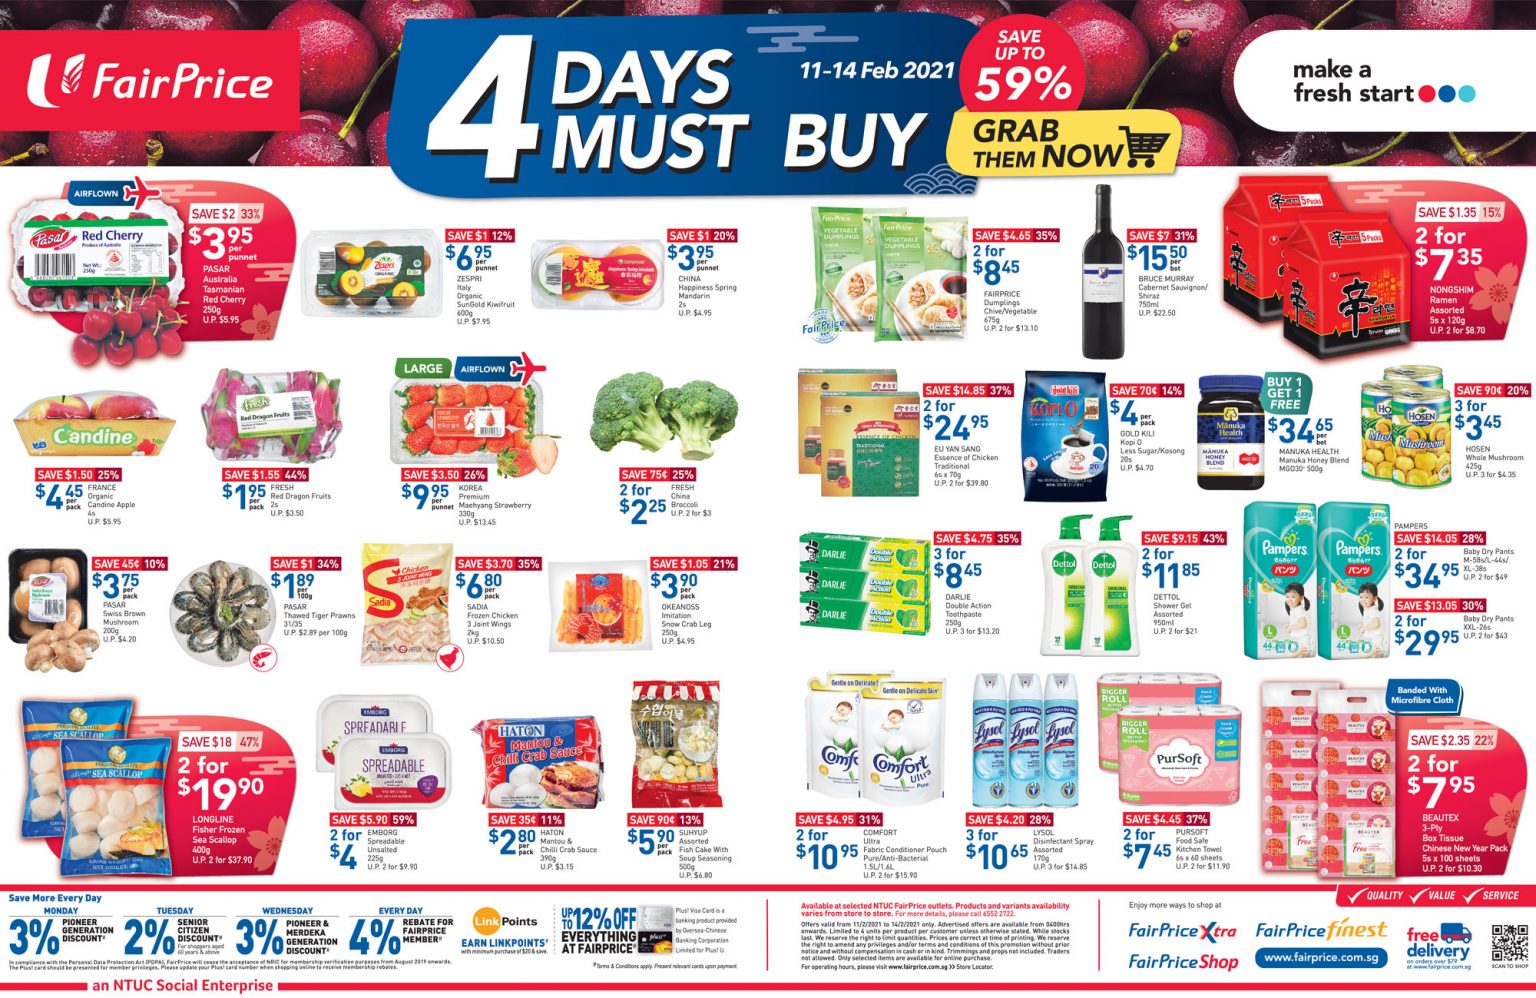 FairPrice’s 4 days must-buy items from now till 14 February 2021